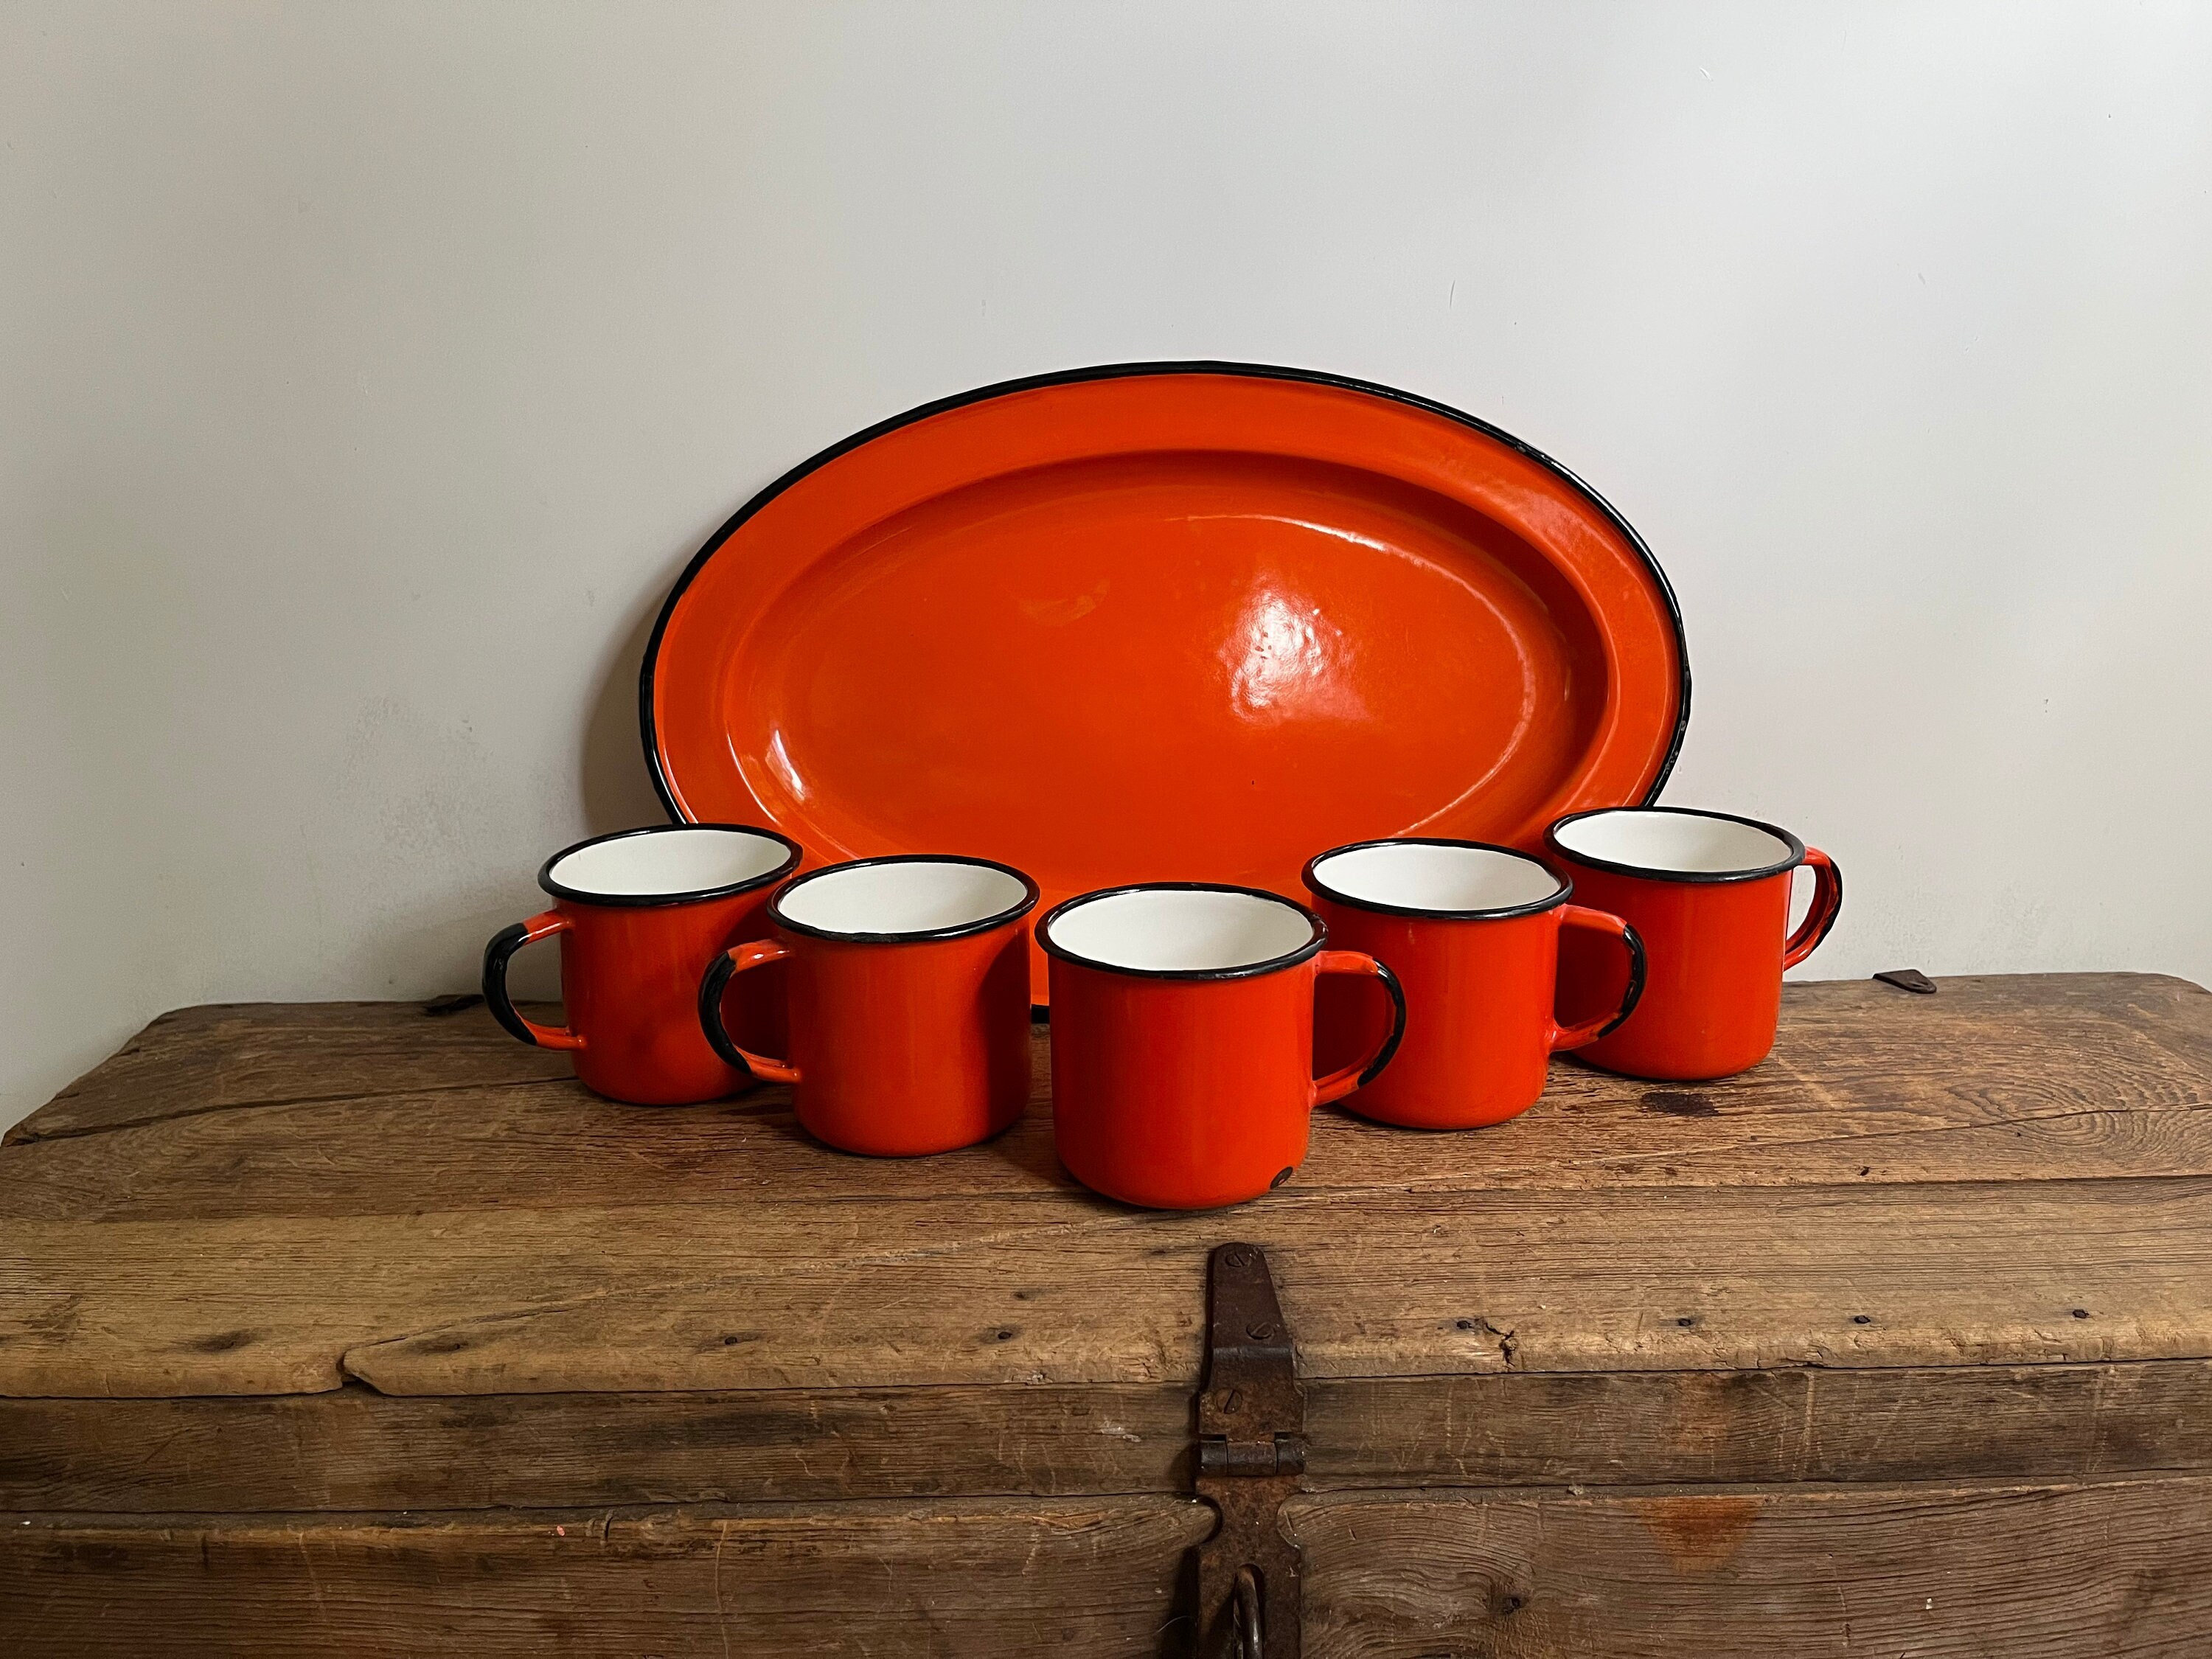 Rustic, Enamel, Bright Orange and White, Long Handled Butter